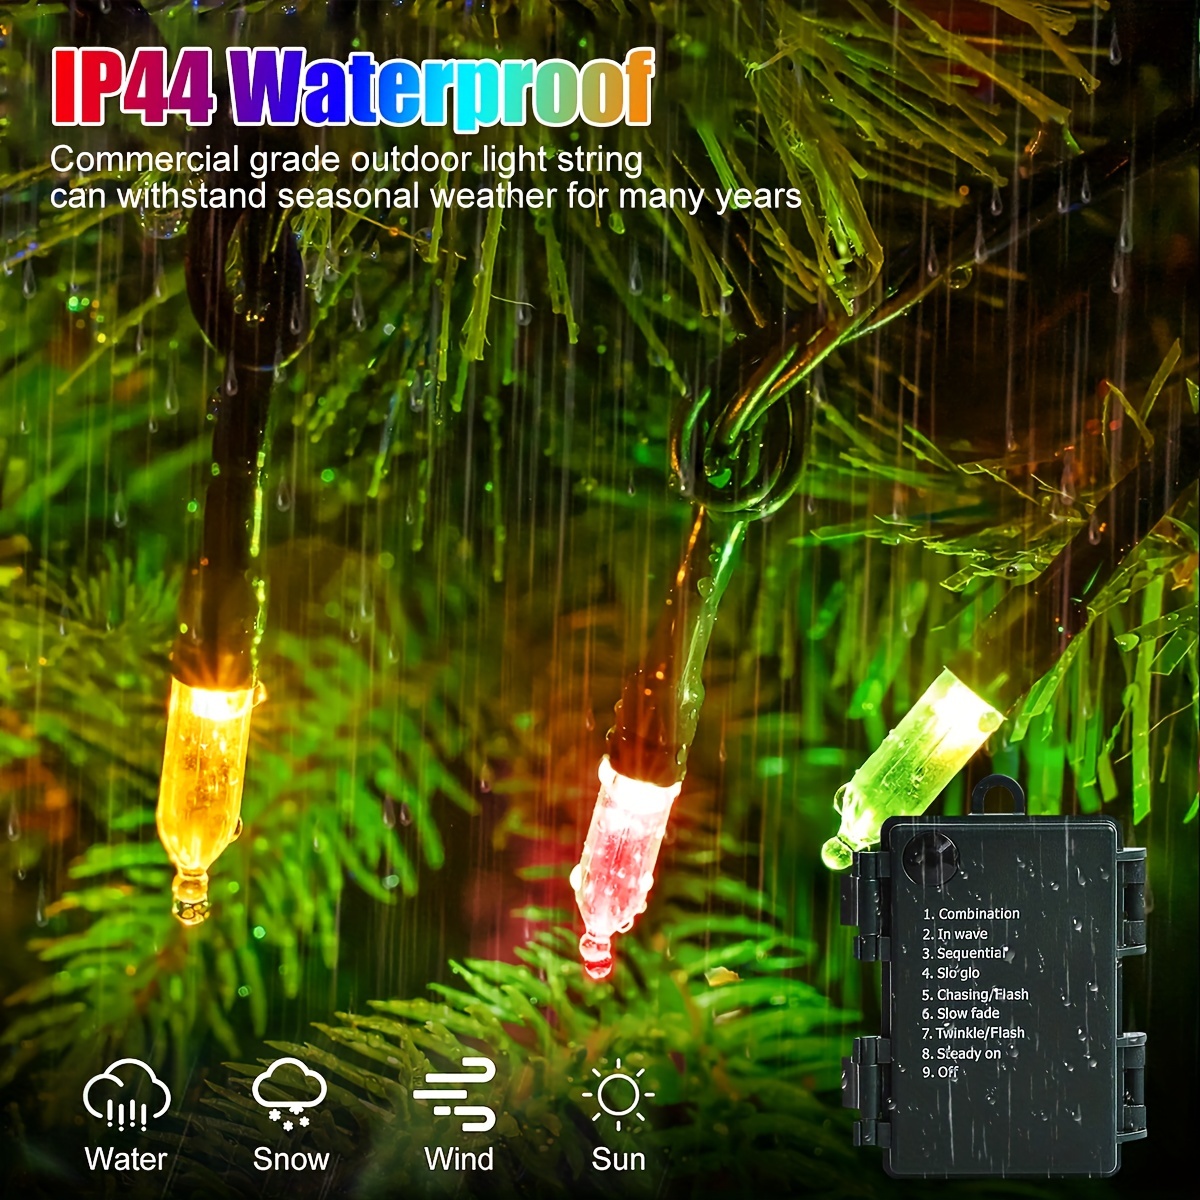 Battery-powered outdoor light with timer - Outdoor lights